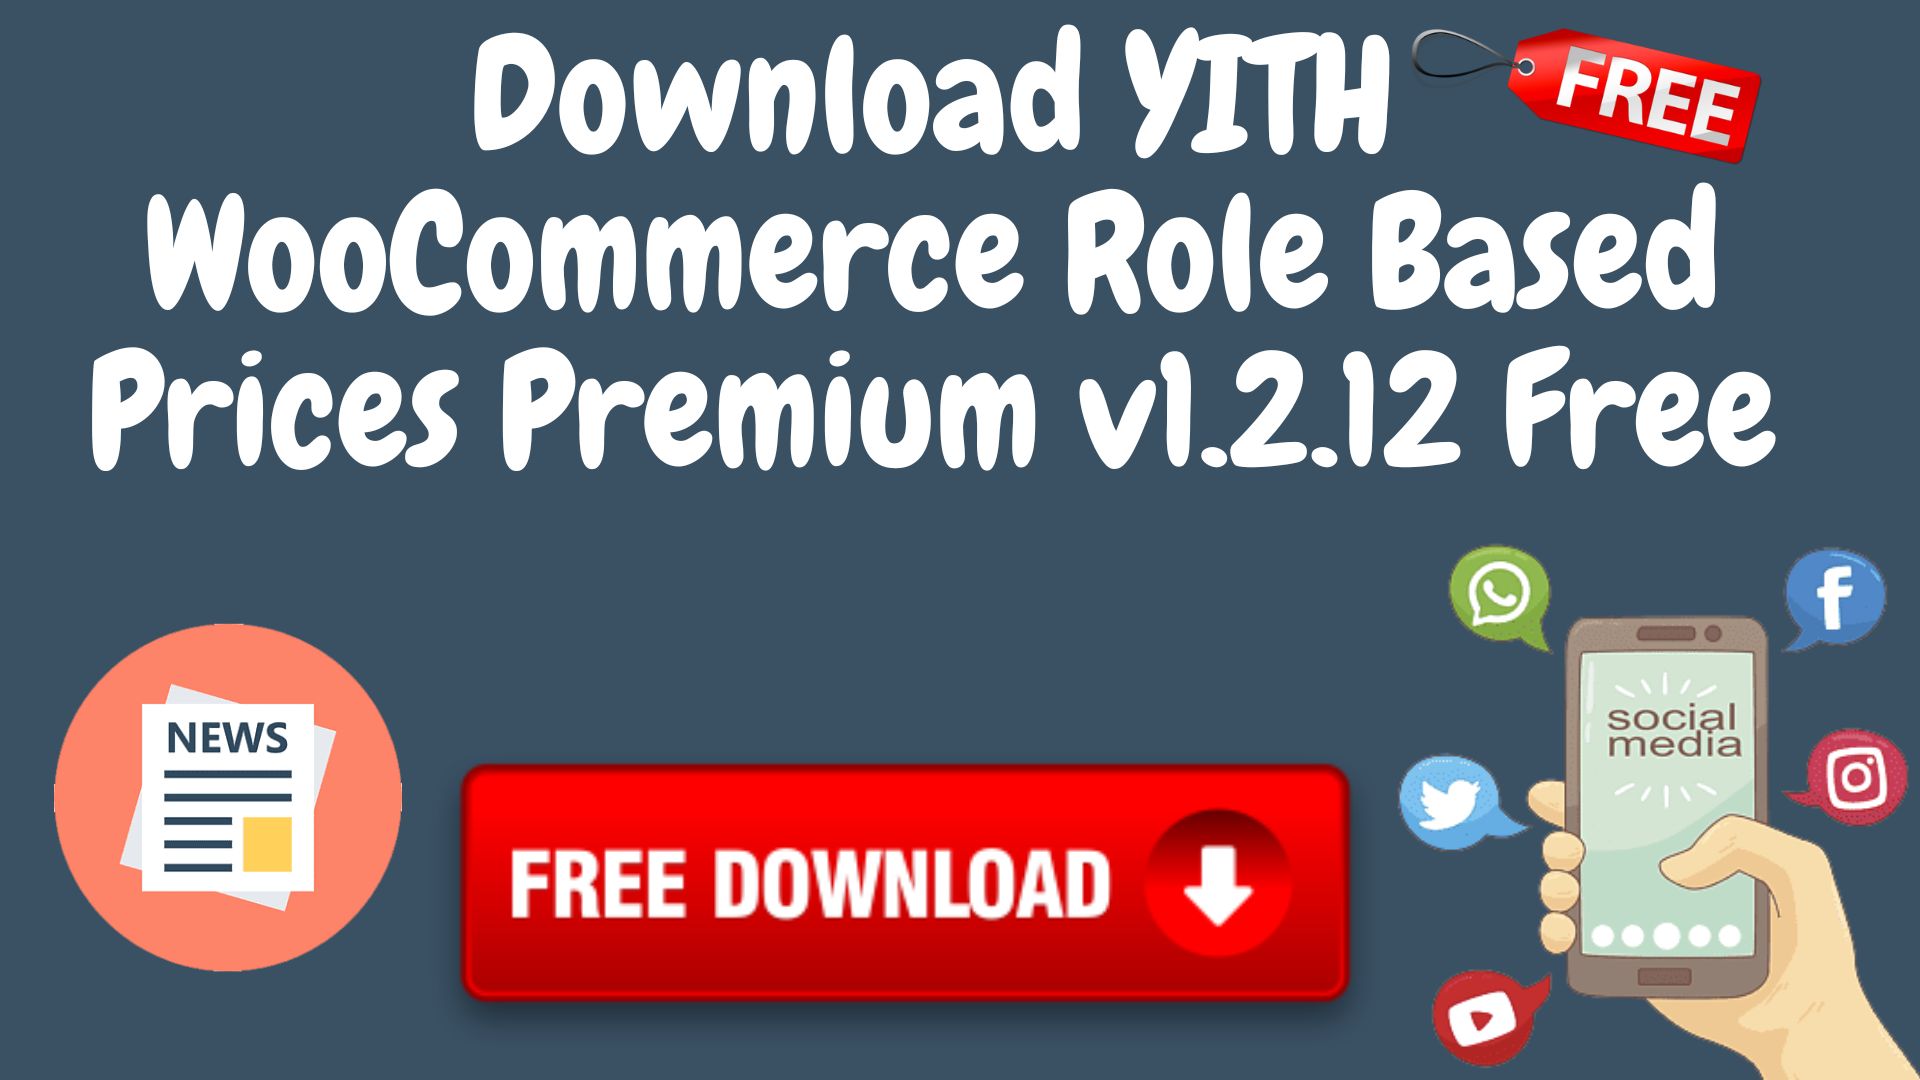 Download Yith Woocommerce Role Based Prices Premium V1.2.12 Free